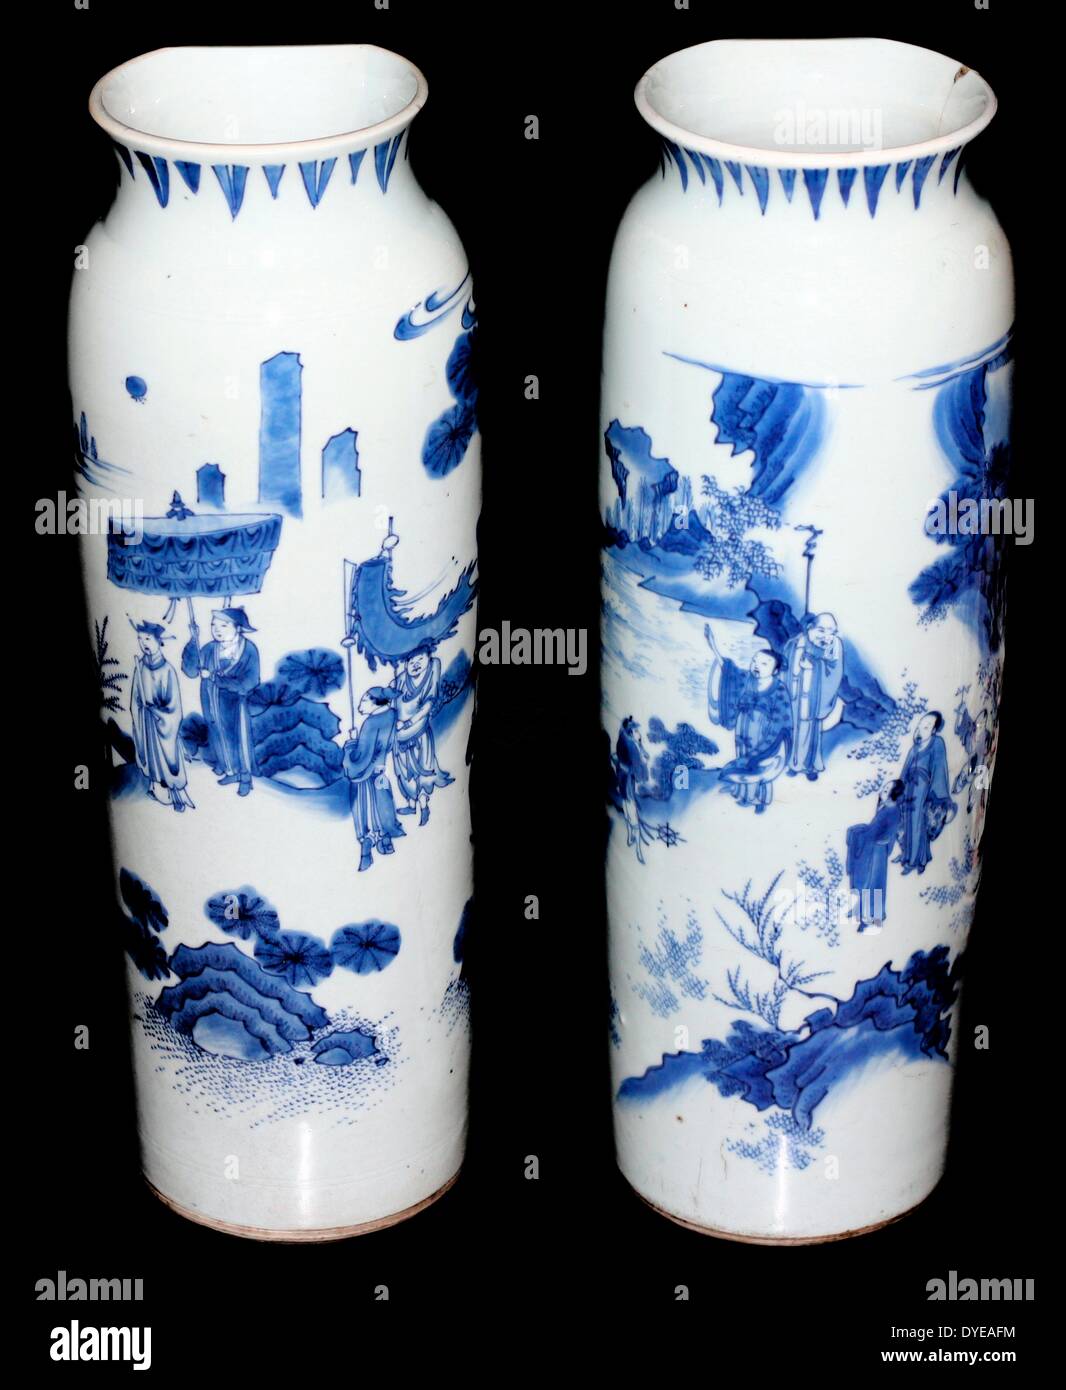 Sleeve vase. China, c 1635-1650, hard-paste porcelain. In the mid-17th century the Dutch East India Company took great pains to buy vases painted in clear blue tints with scenes full of trees and rocks alternating with Chinese figures. This ware is known as 'Transitional porcelain', since it was made in the period of transition from the Ming dynasty (1368-1644) to the Qing dynasty (1644-1911). Stock Photo